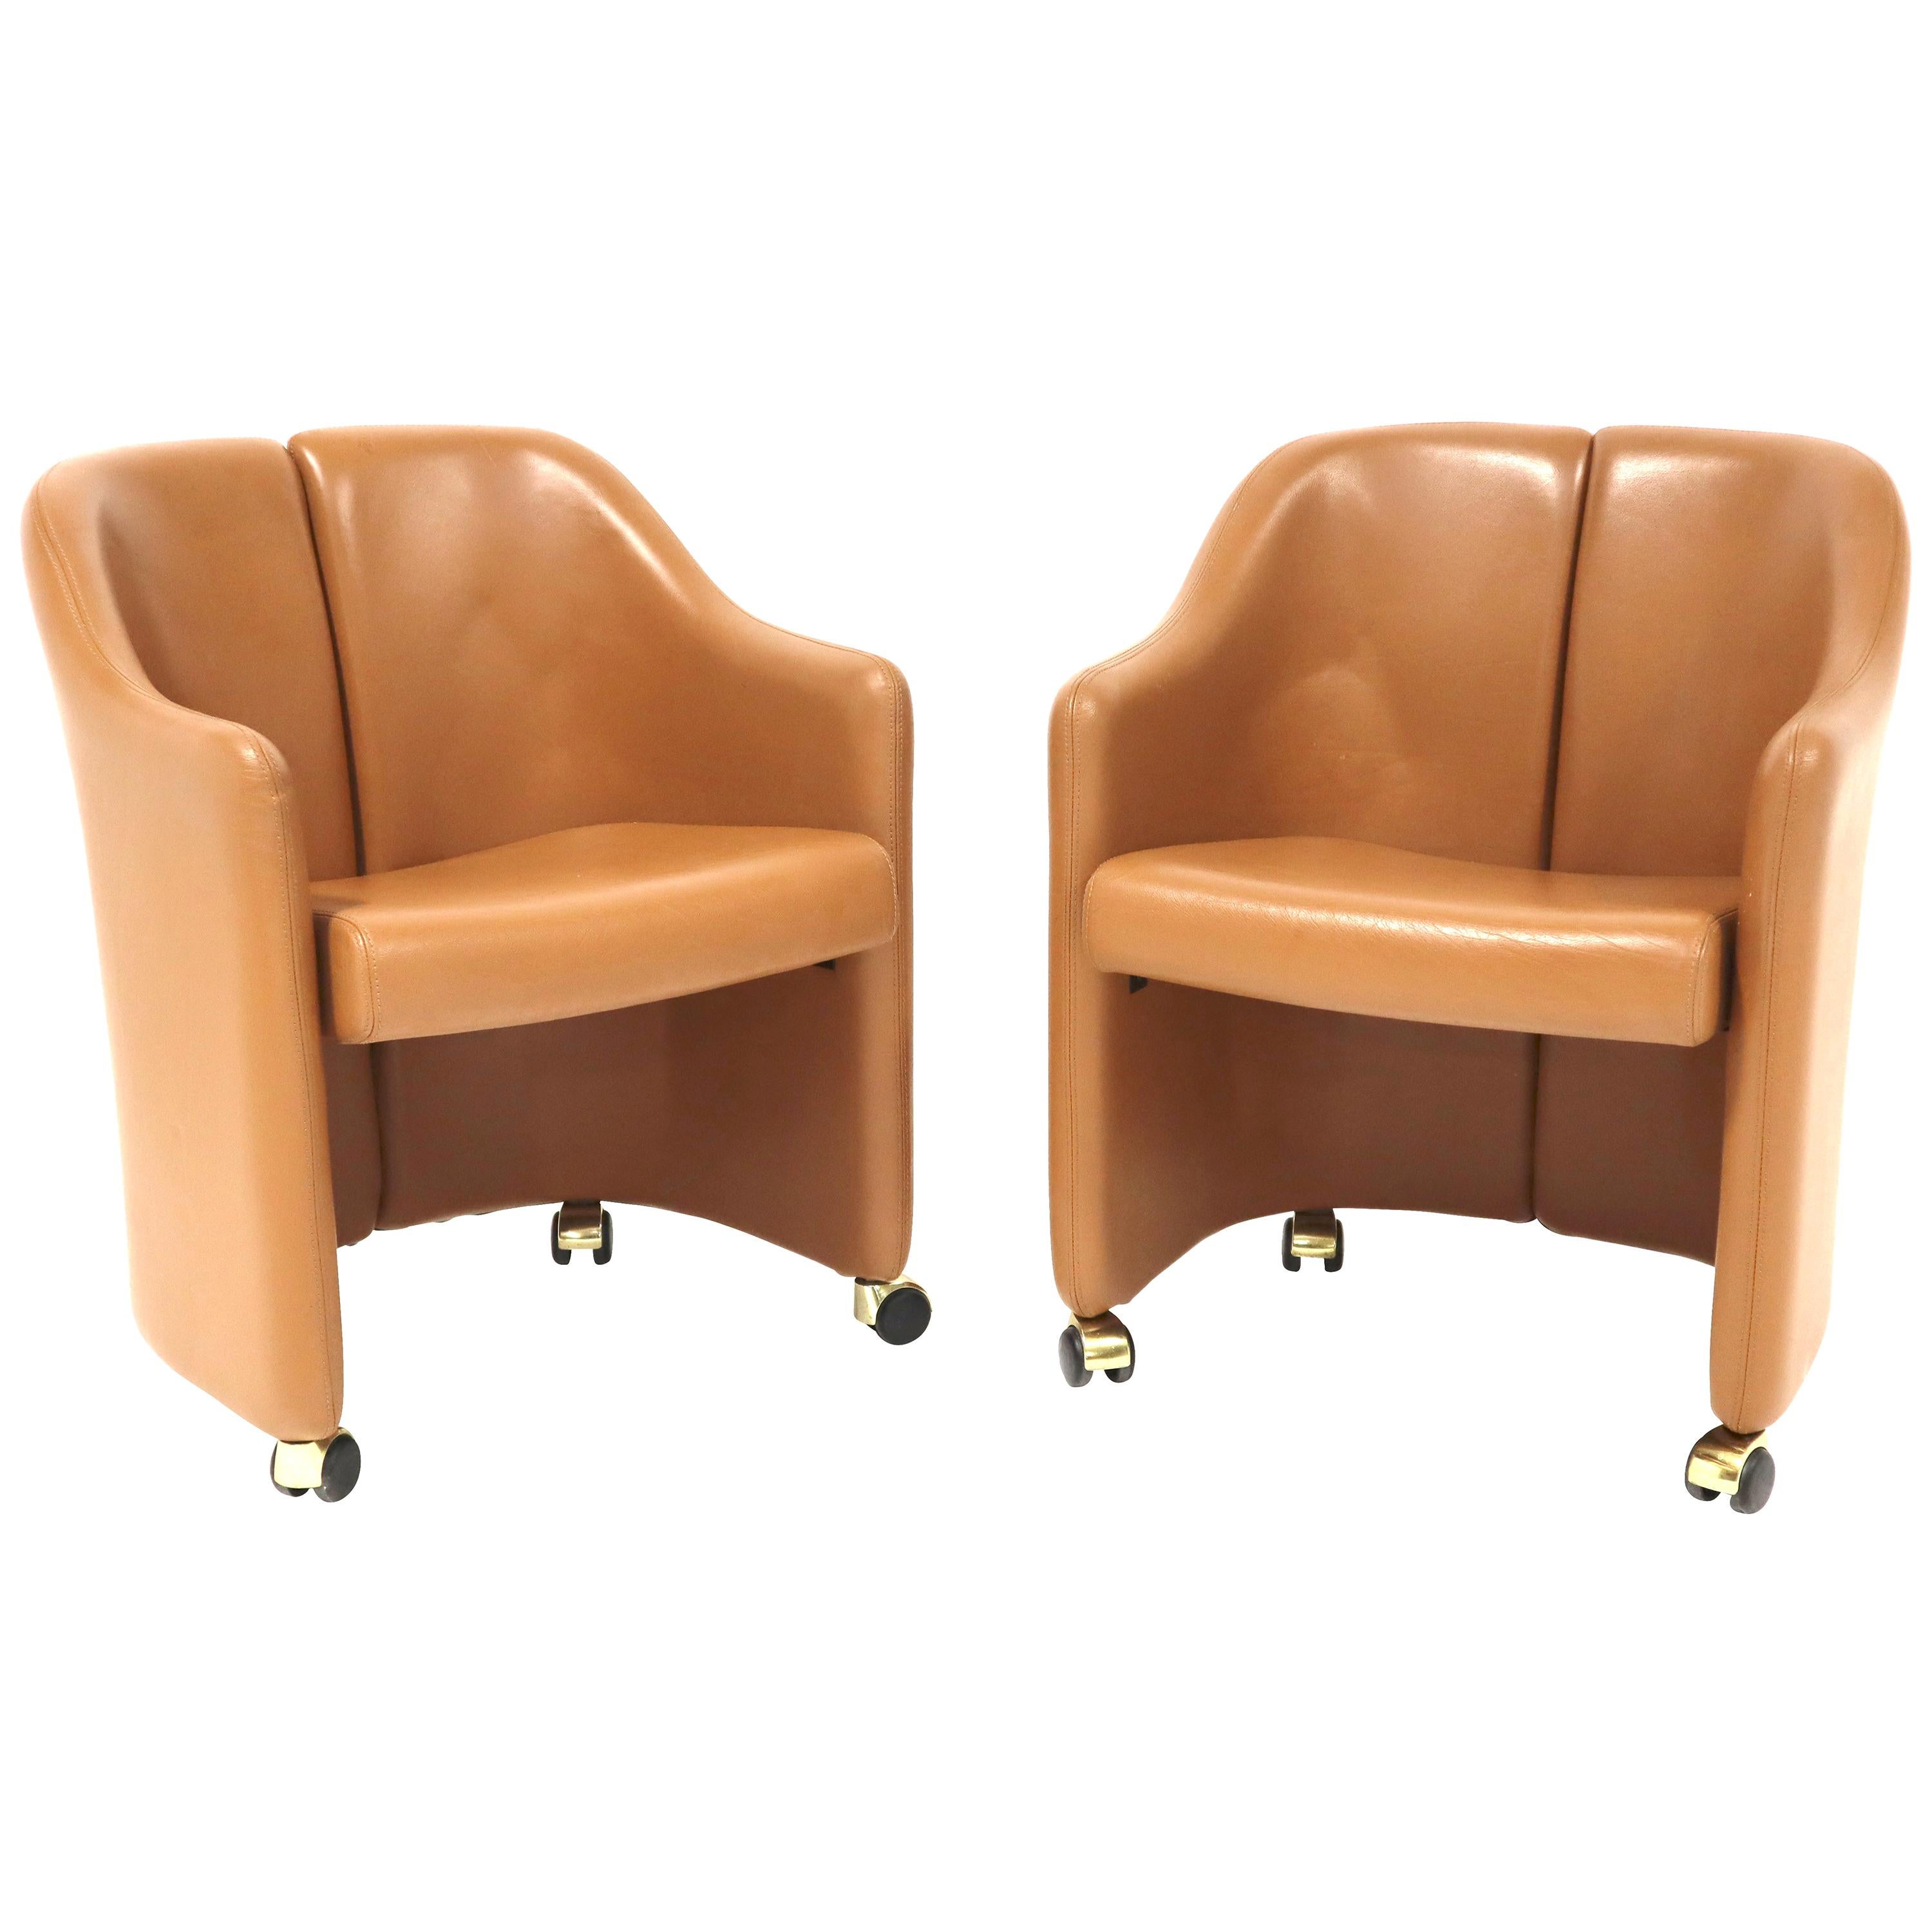 Eugenio Gerli for Tecno, “Series 142” Leather Chairs